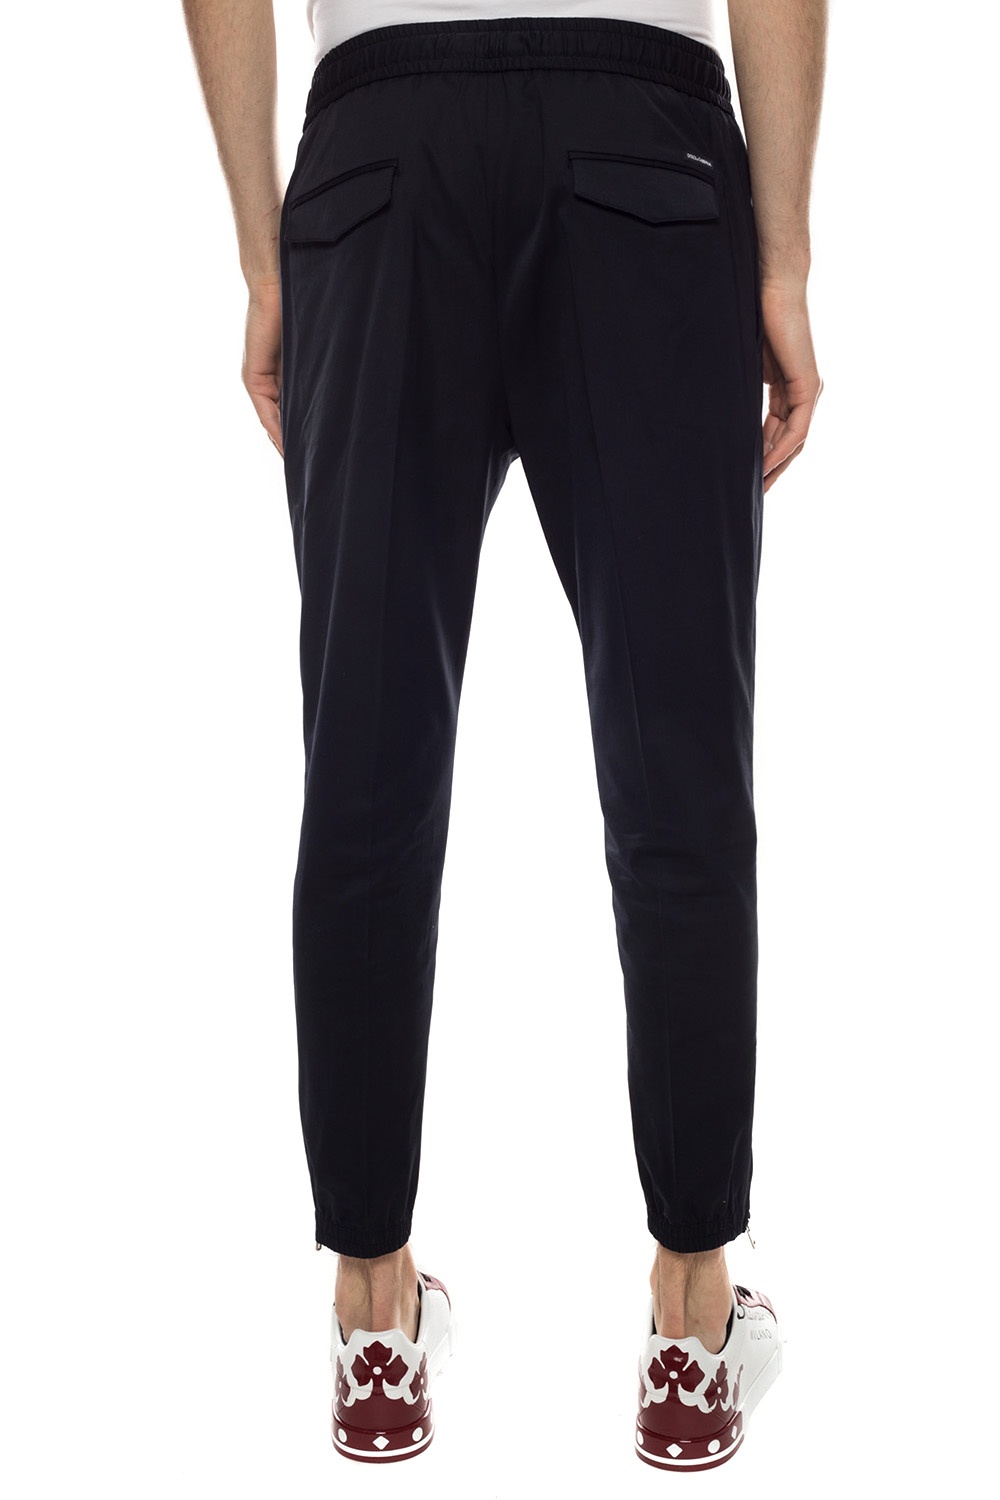 Dolce & Gabbana Mid trousers with topstitching detail